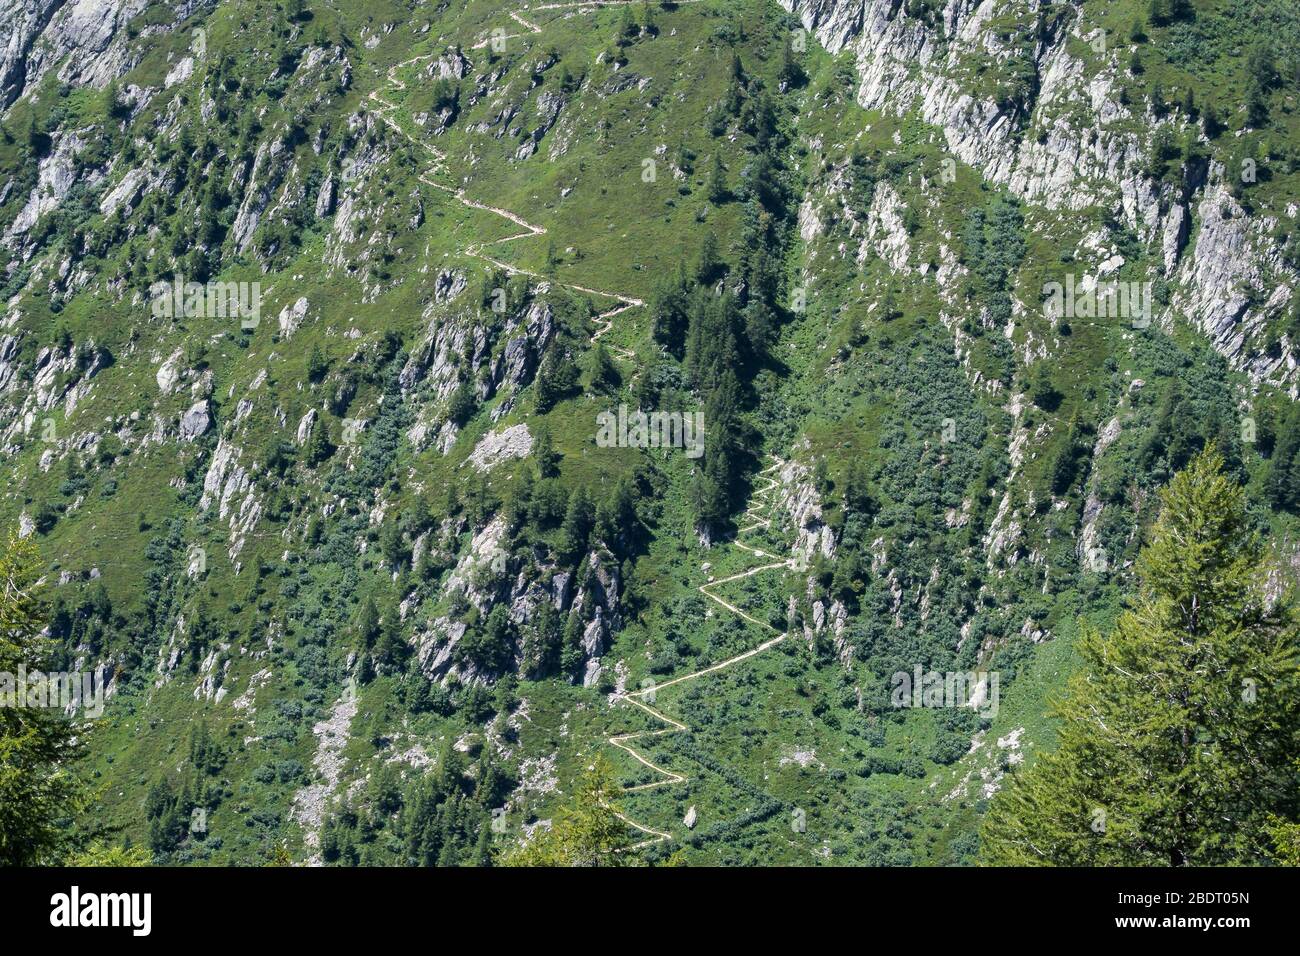 Part of the popular Tour du Mont Blanc trail zigzag with multiple switchback turns leading up a lush green mountainside in the Aiguilles Rouges massif Stock Photo